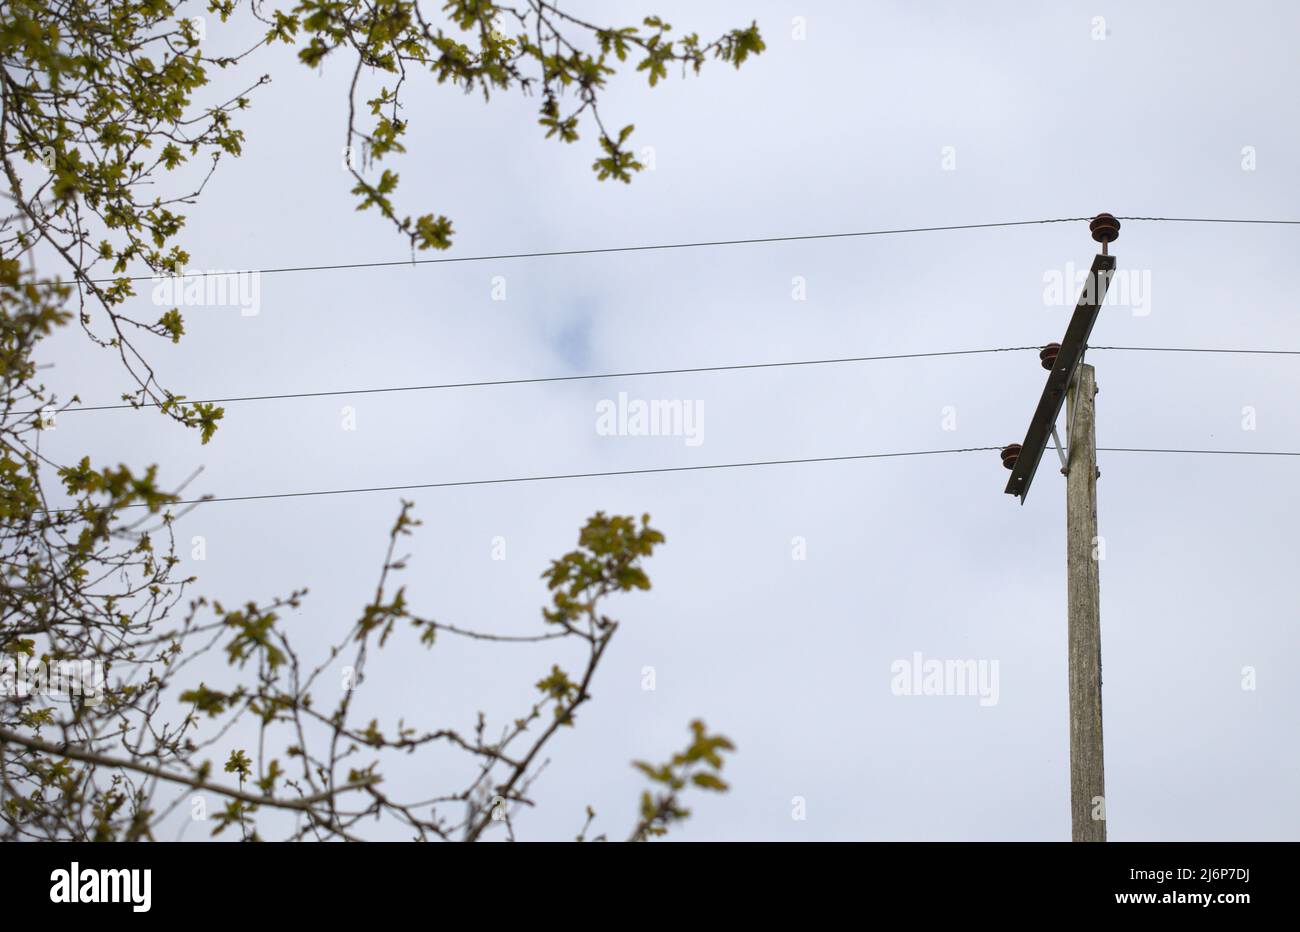 Electricity overhead power lines of high and medium voltage distribution network Stock Photo